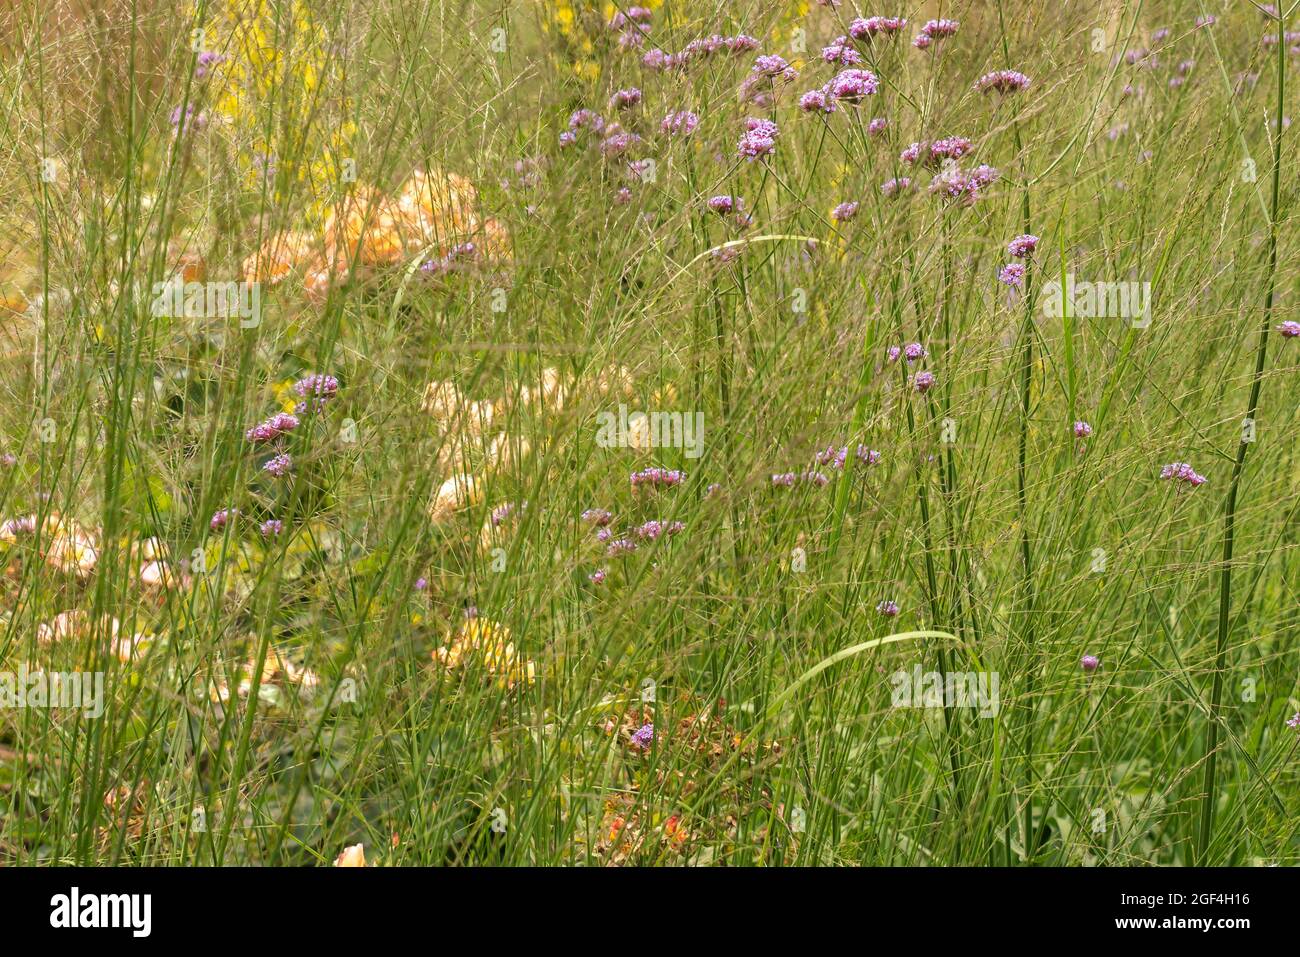 Meadow grass, grass lands, wild flowers, unkempt, mixture, planting, grass, back to nature, not manicured, wild, overgrown, seeded, plains, colourful. Stock Photo